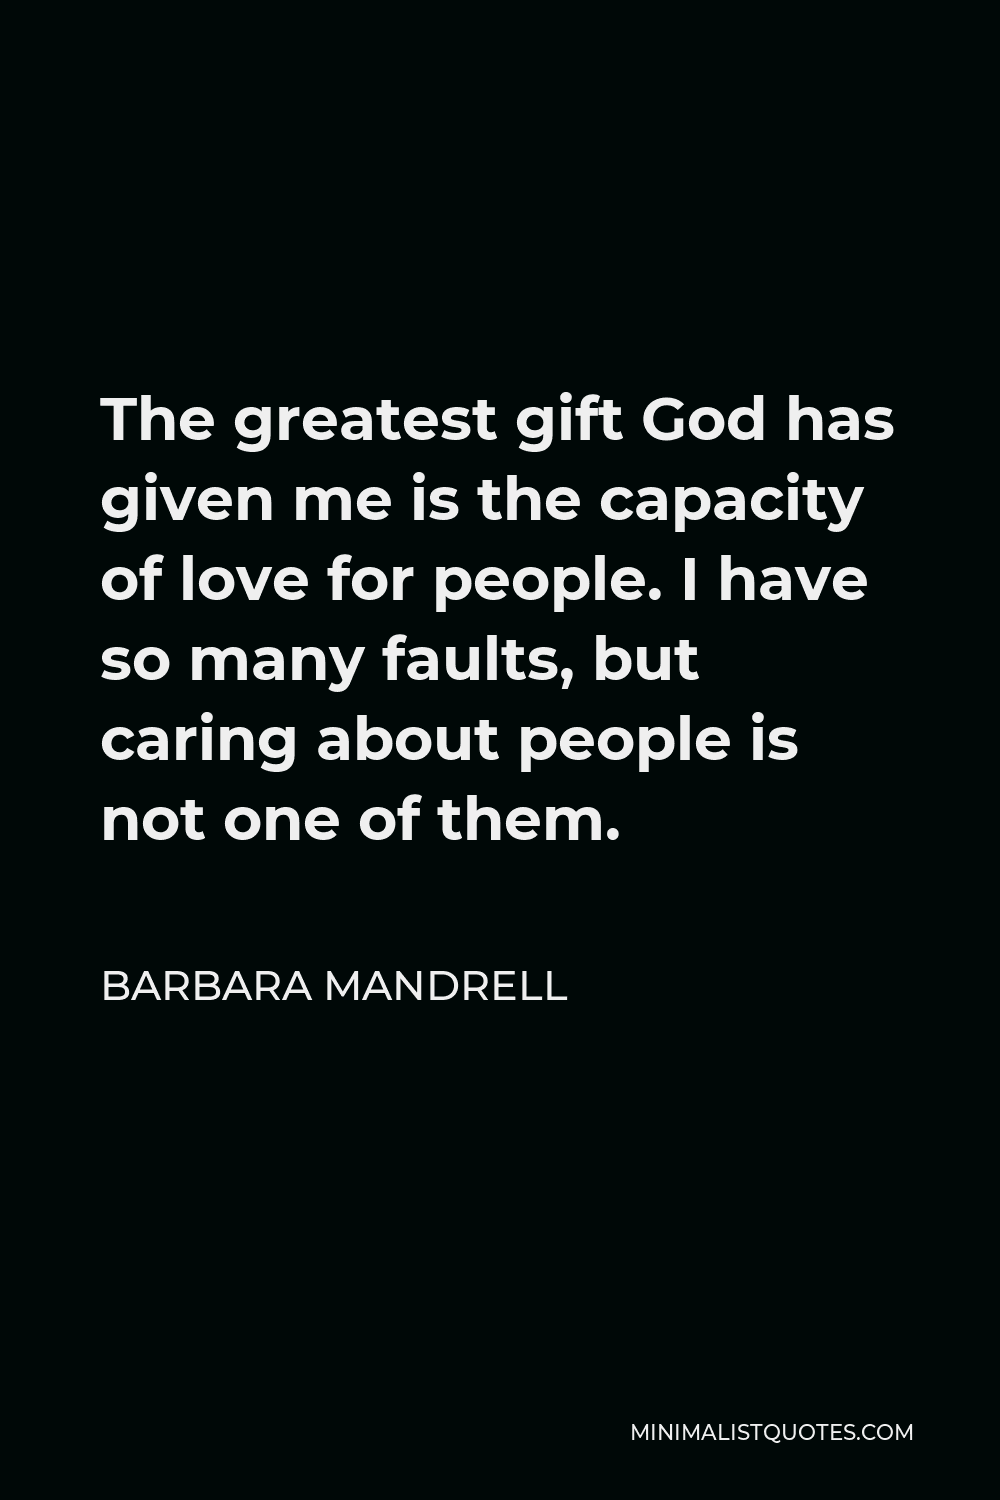 Barbara Mandrell Quote - The greatest gift God has given me is the capacity of love for people. I have so many faults, but caring about people is not one of them.